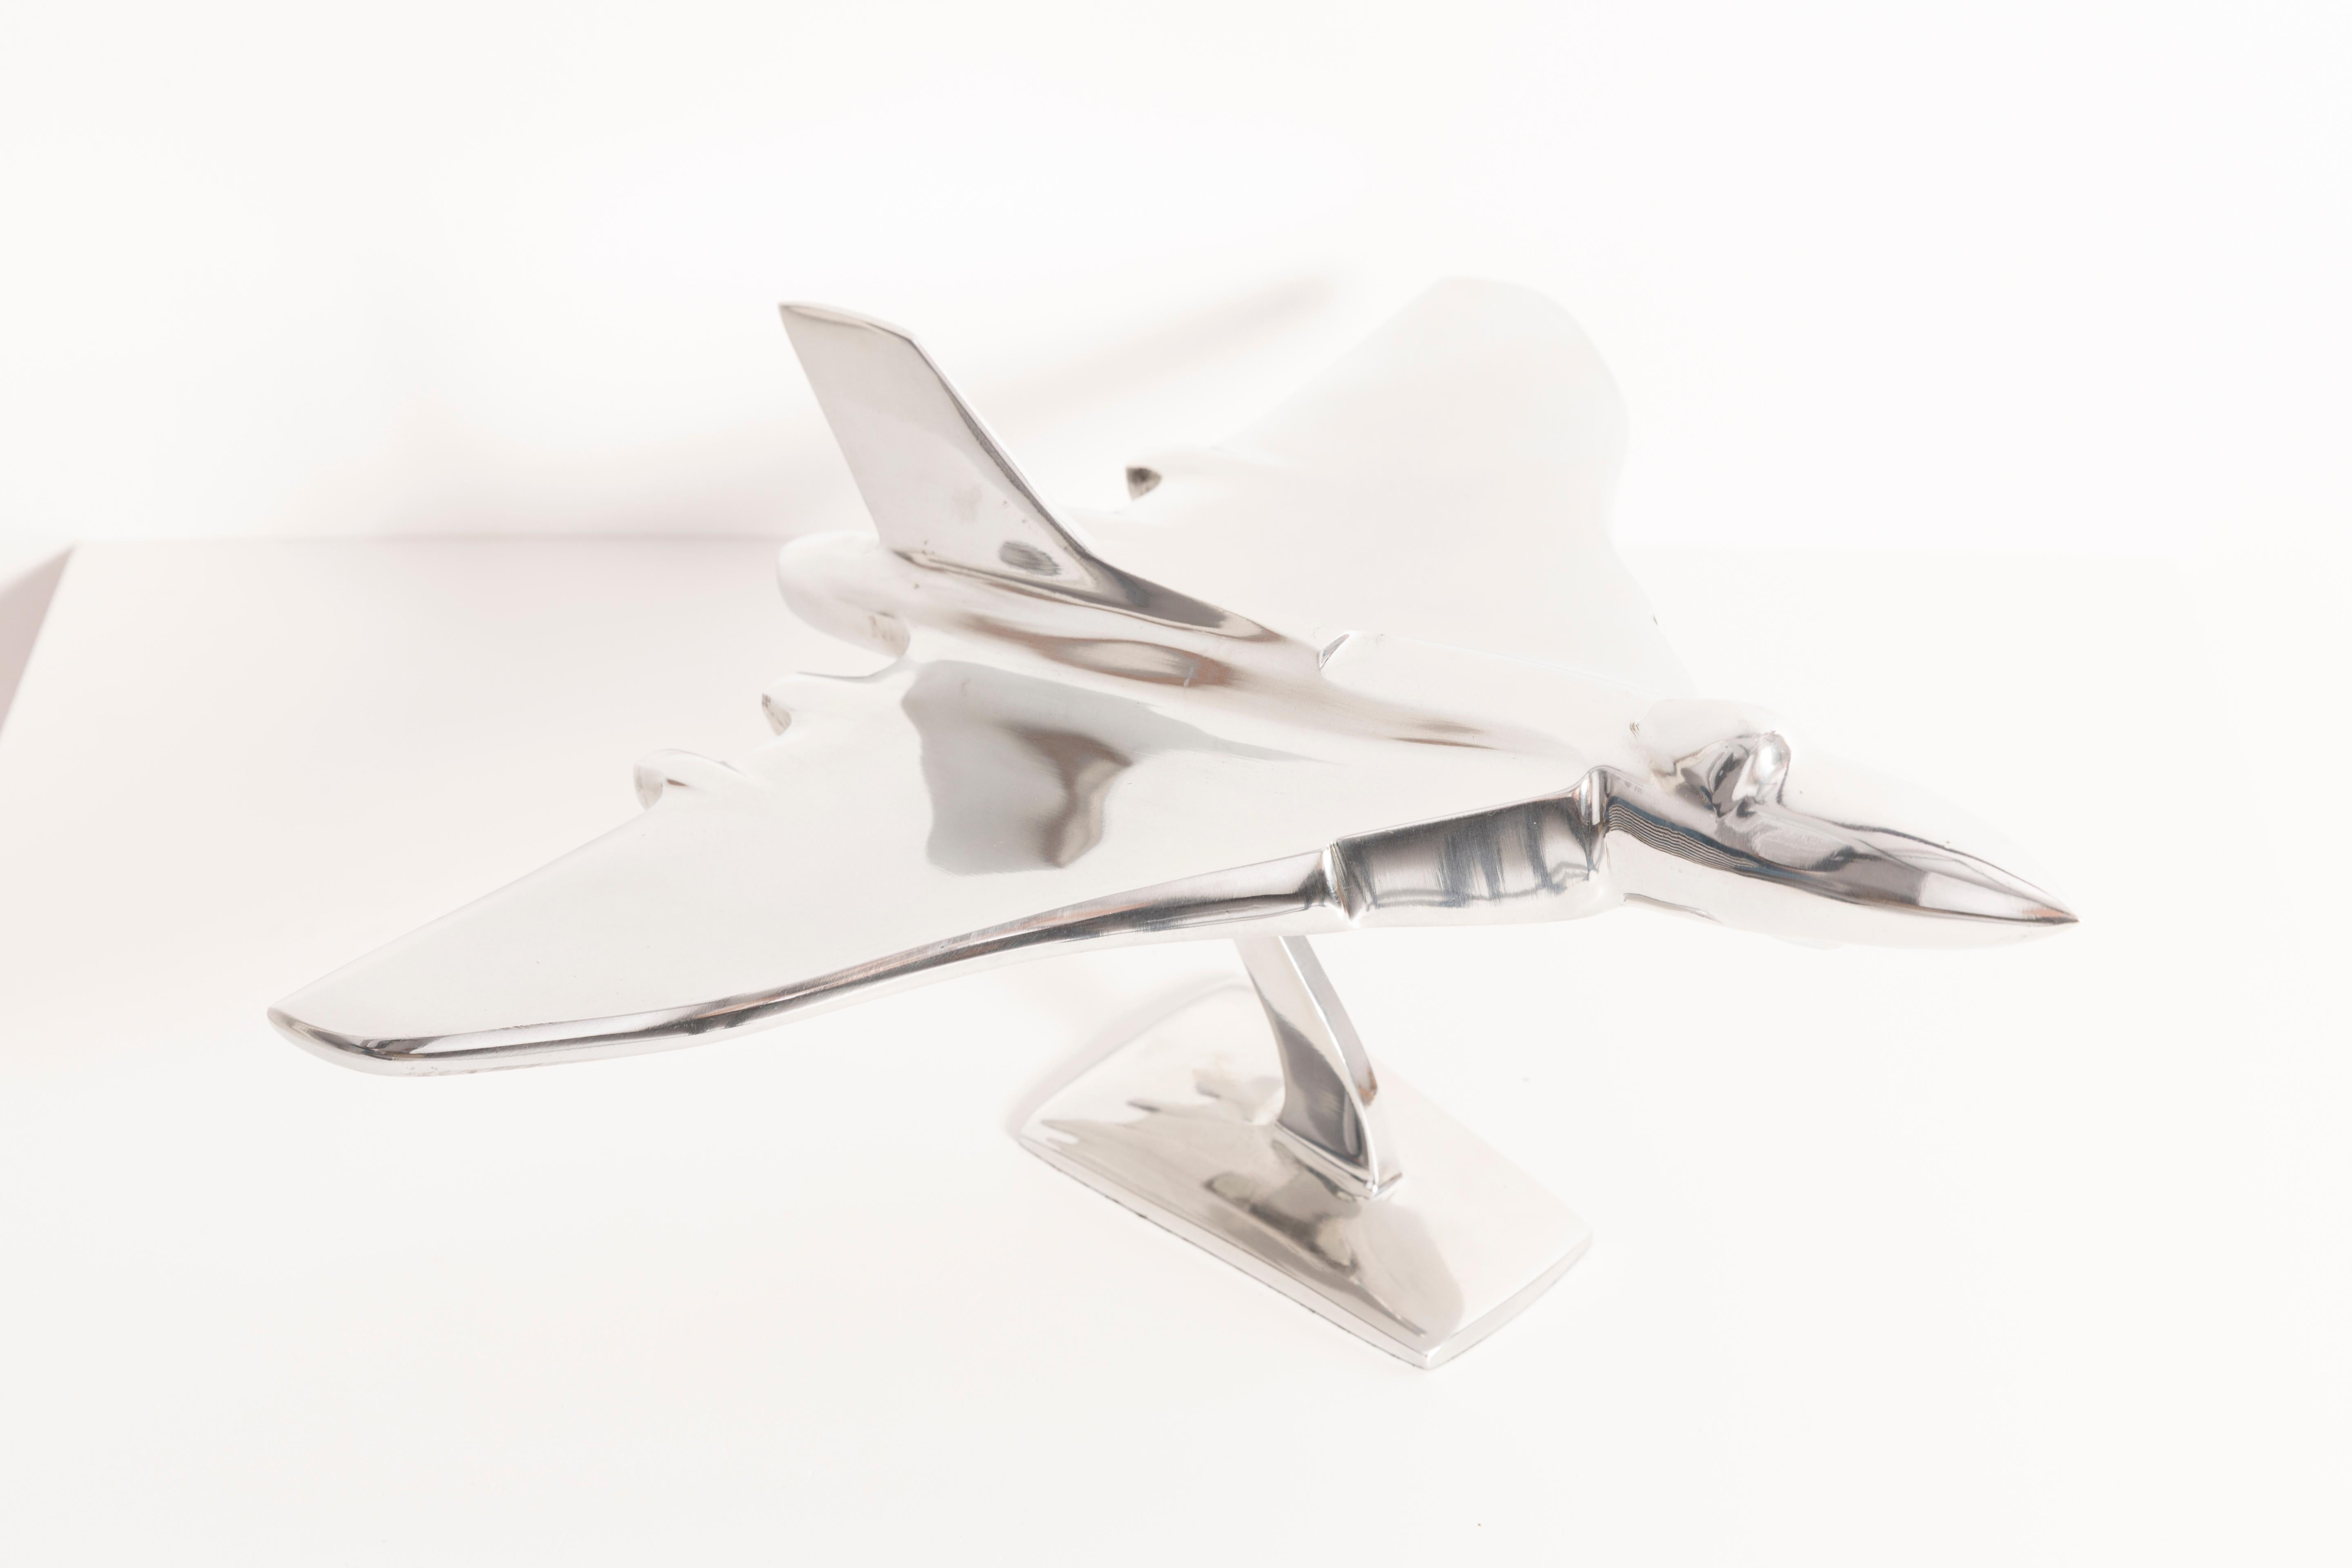 Art Modern airplane sculpture, Art Deco style, 1960s, produced in Germany, perfect original vintage condition. Only one unique piece.